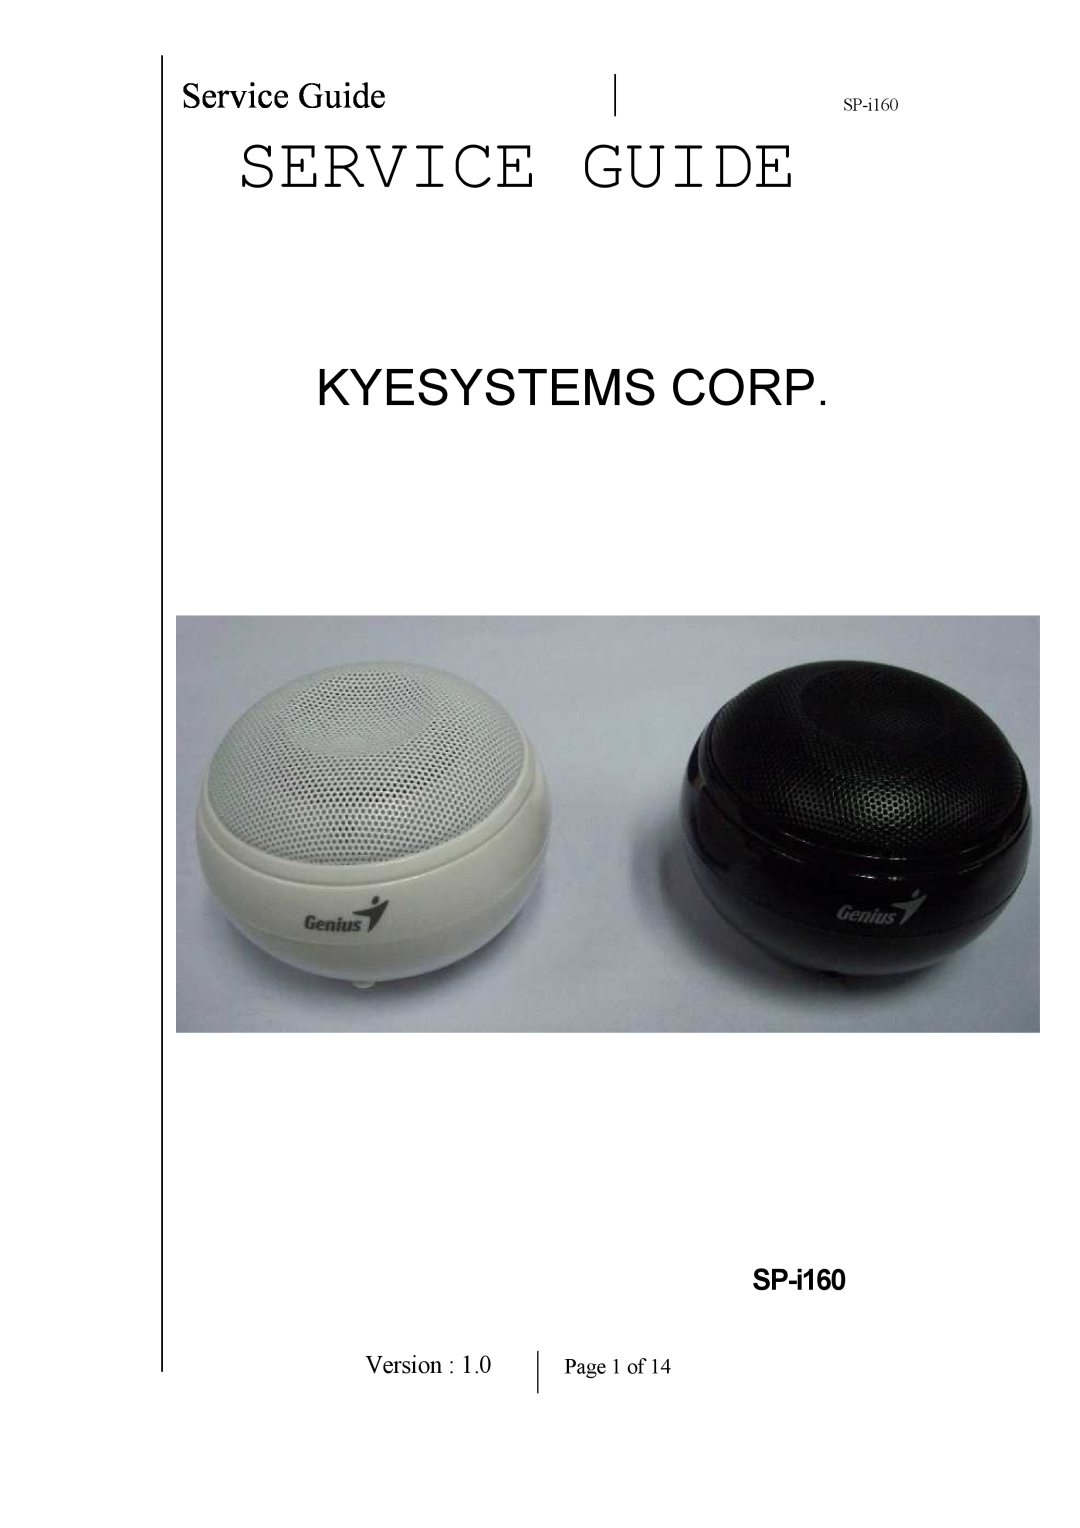 Genius 31730952100 manual Service Guide, Version, Kyesystems Corp, SP-i160 